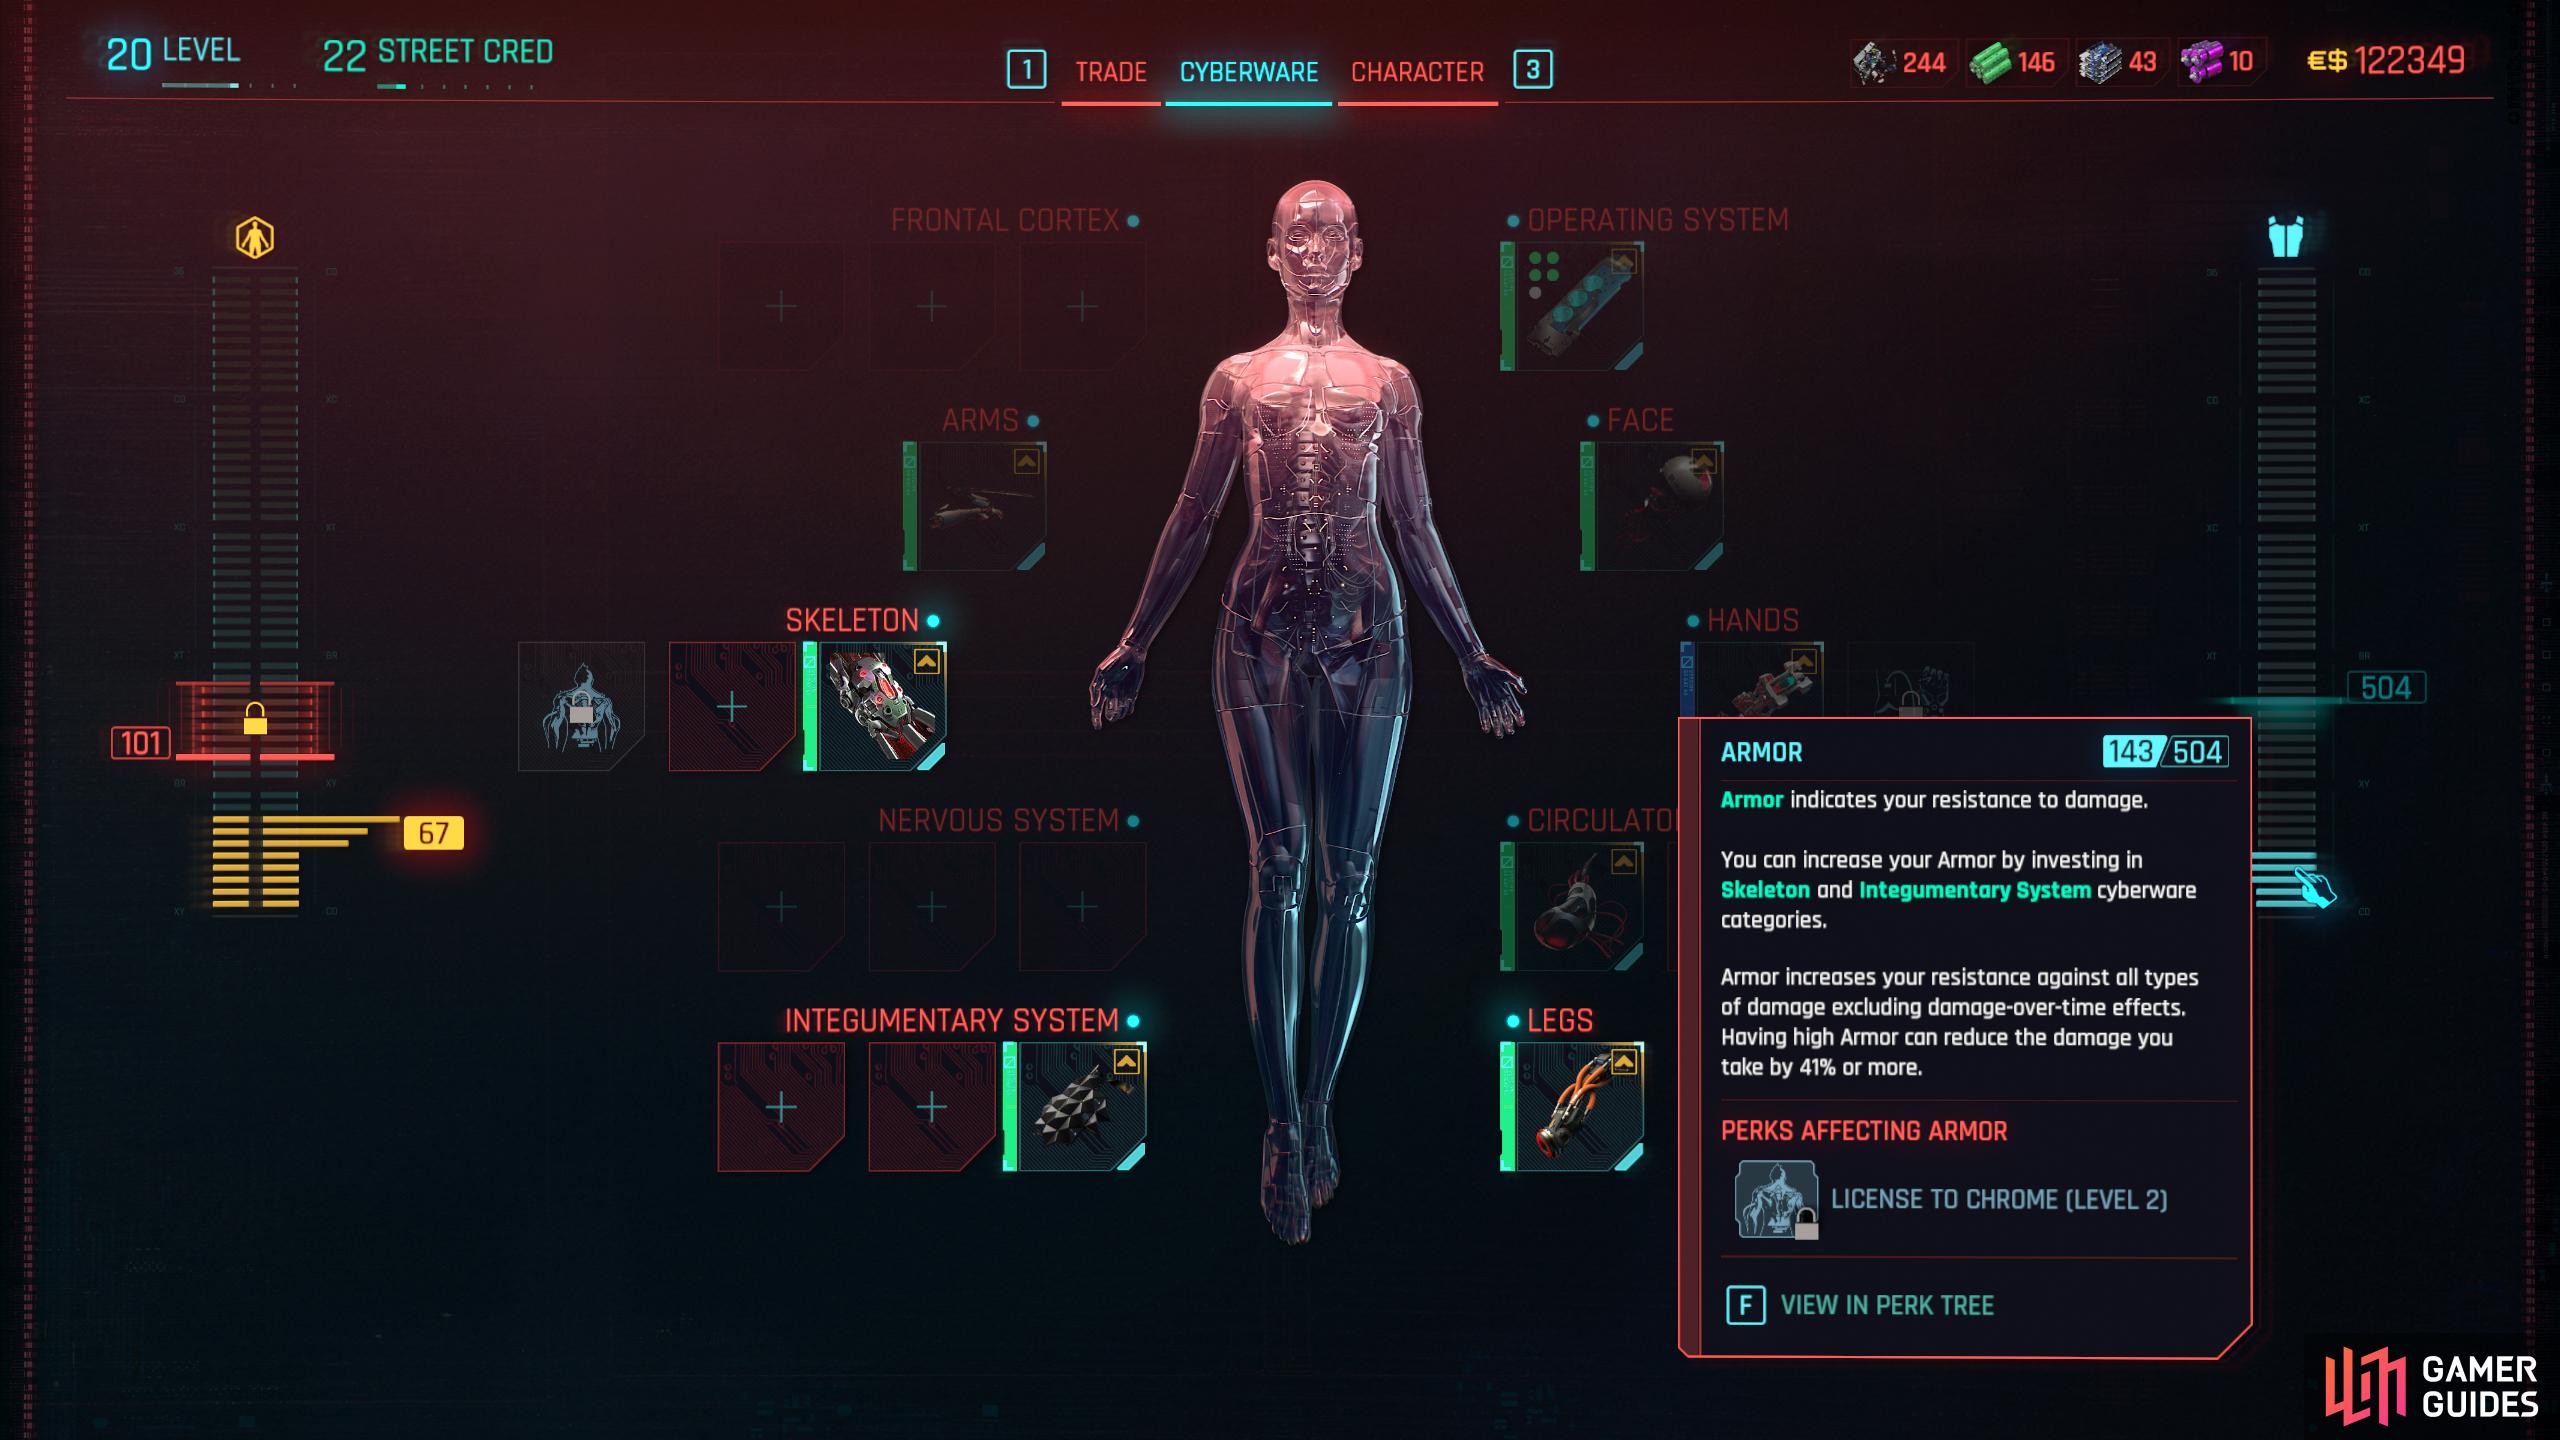 Armor is indicated by the large blue bar on the right side of the Cyberware screen.